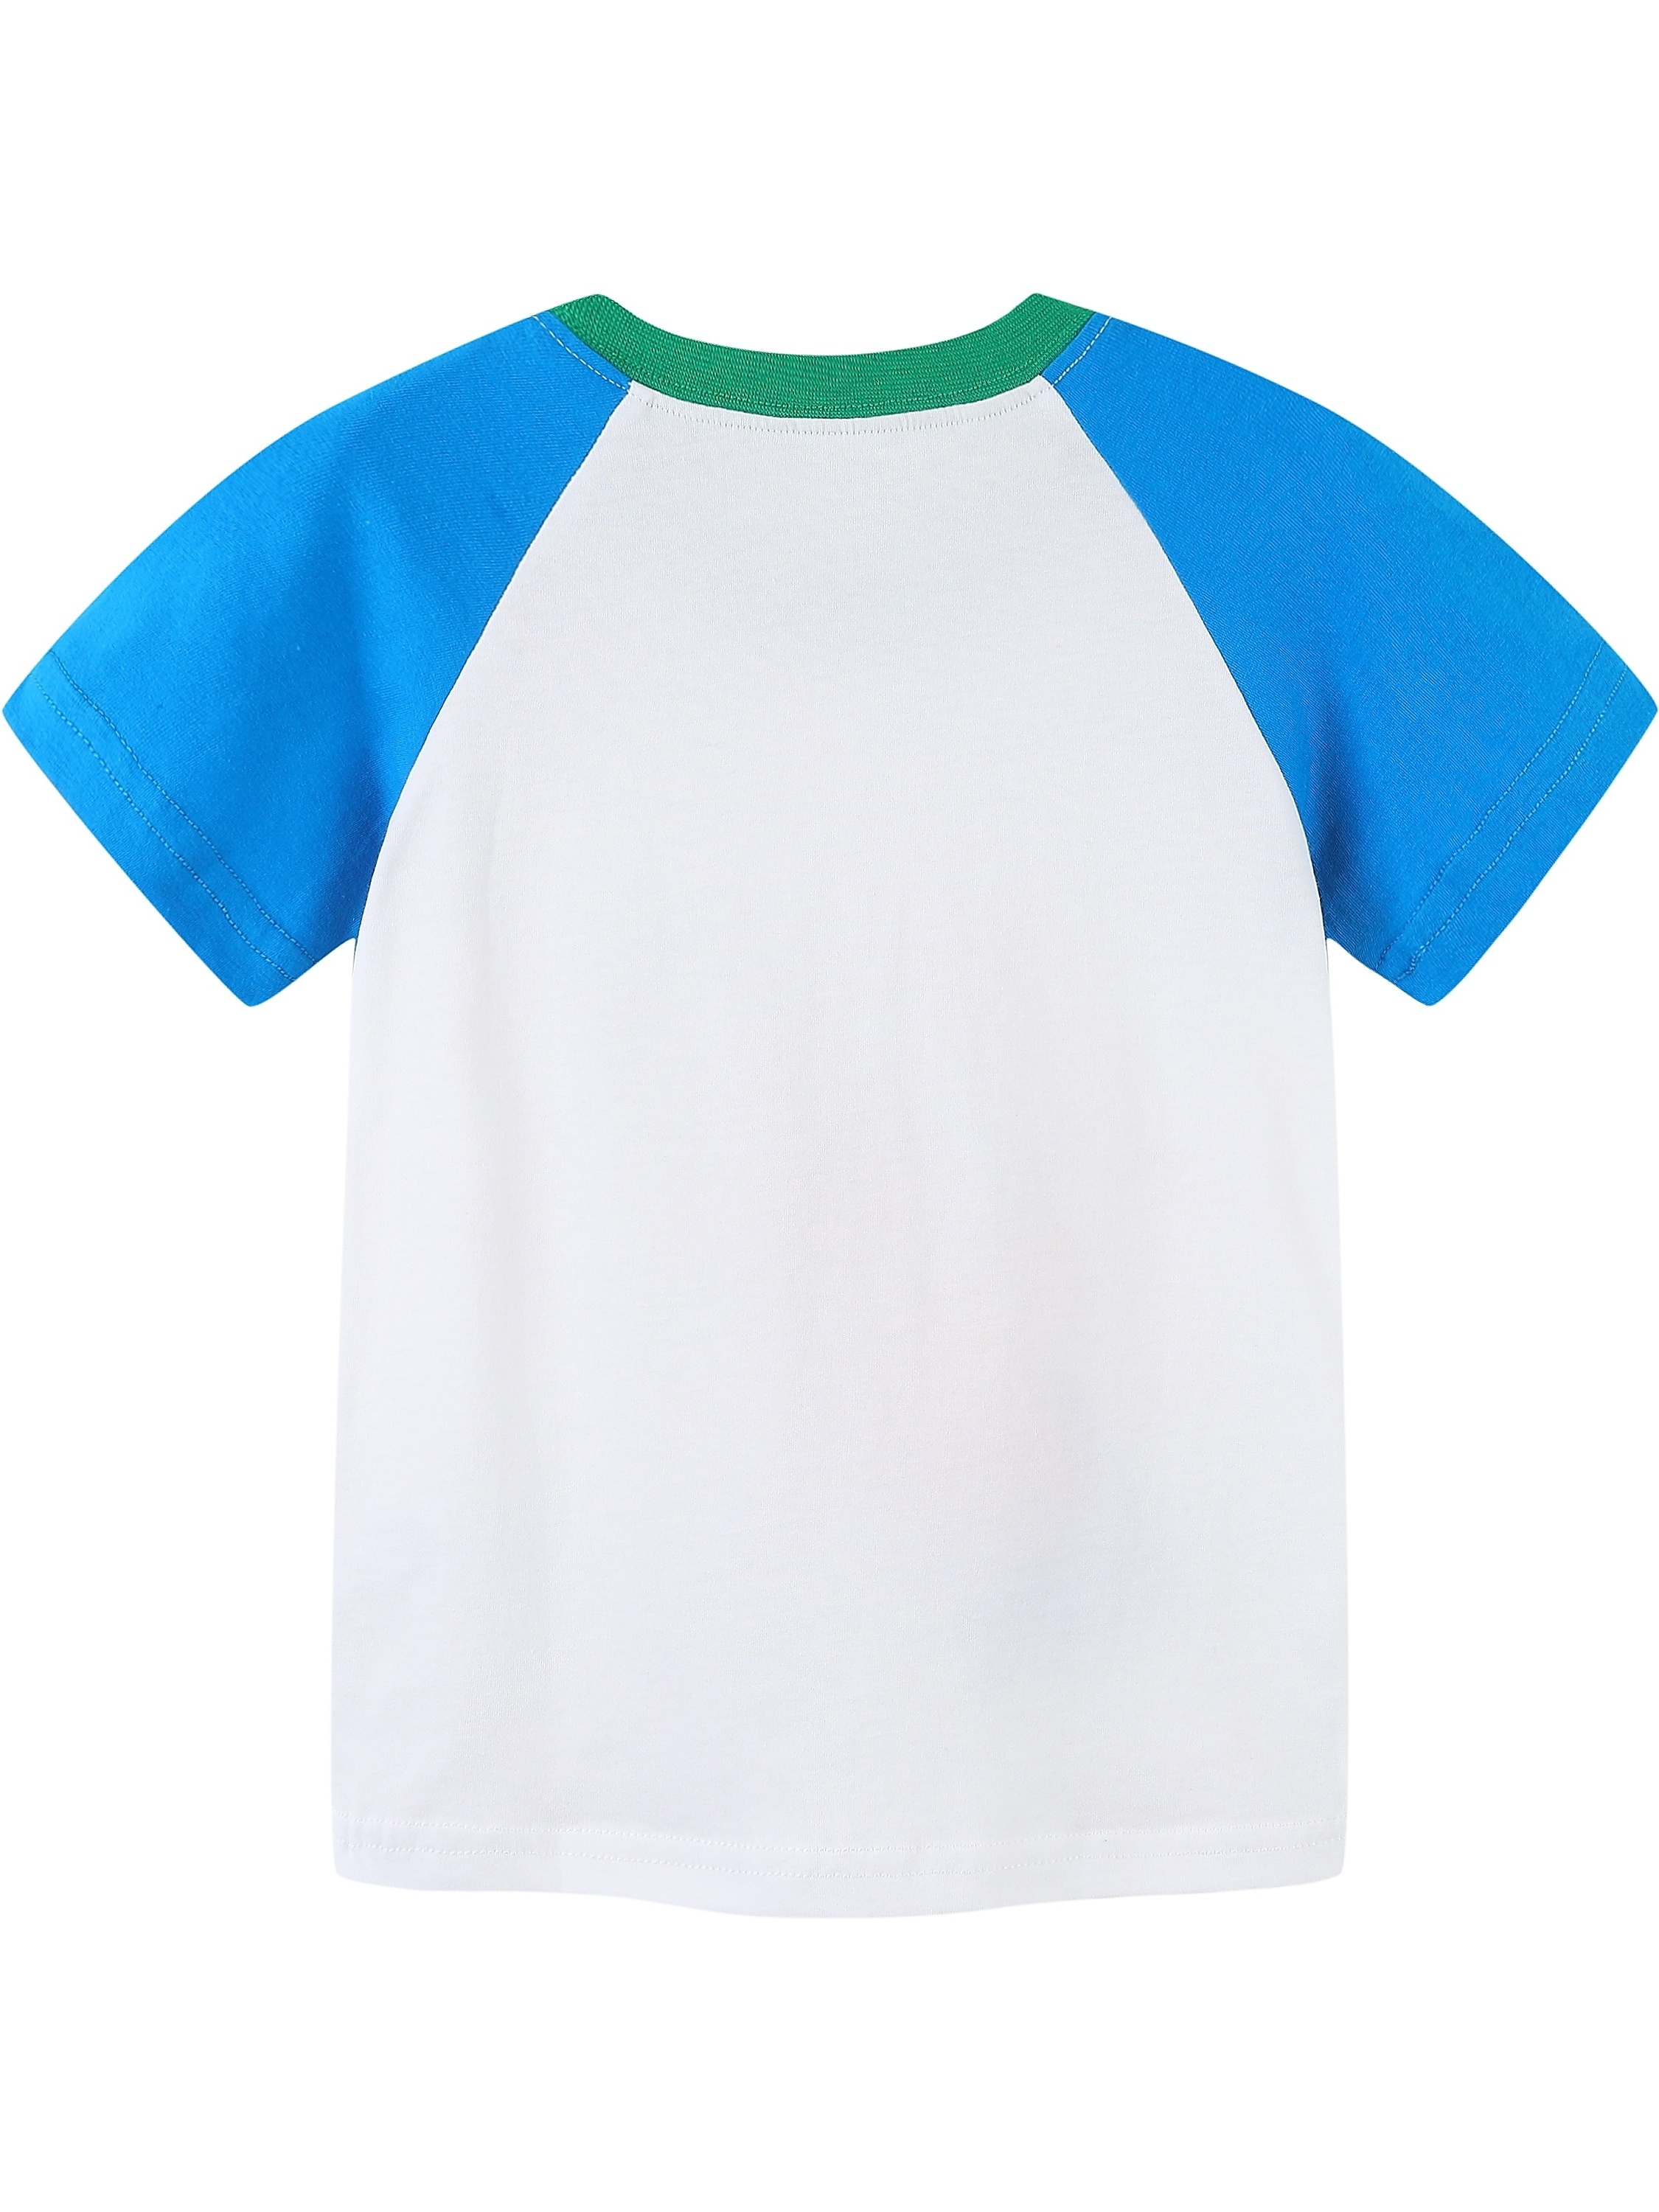 T-shirt with Drawing Cartoon Rocket in Space for Boy Color Variation for  Coloring on a White Stock Illustration - Illustration of color, isolated:  252426654